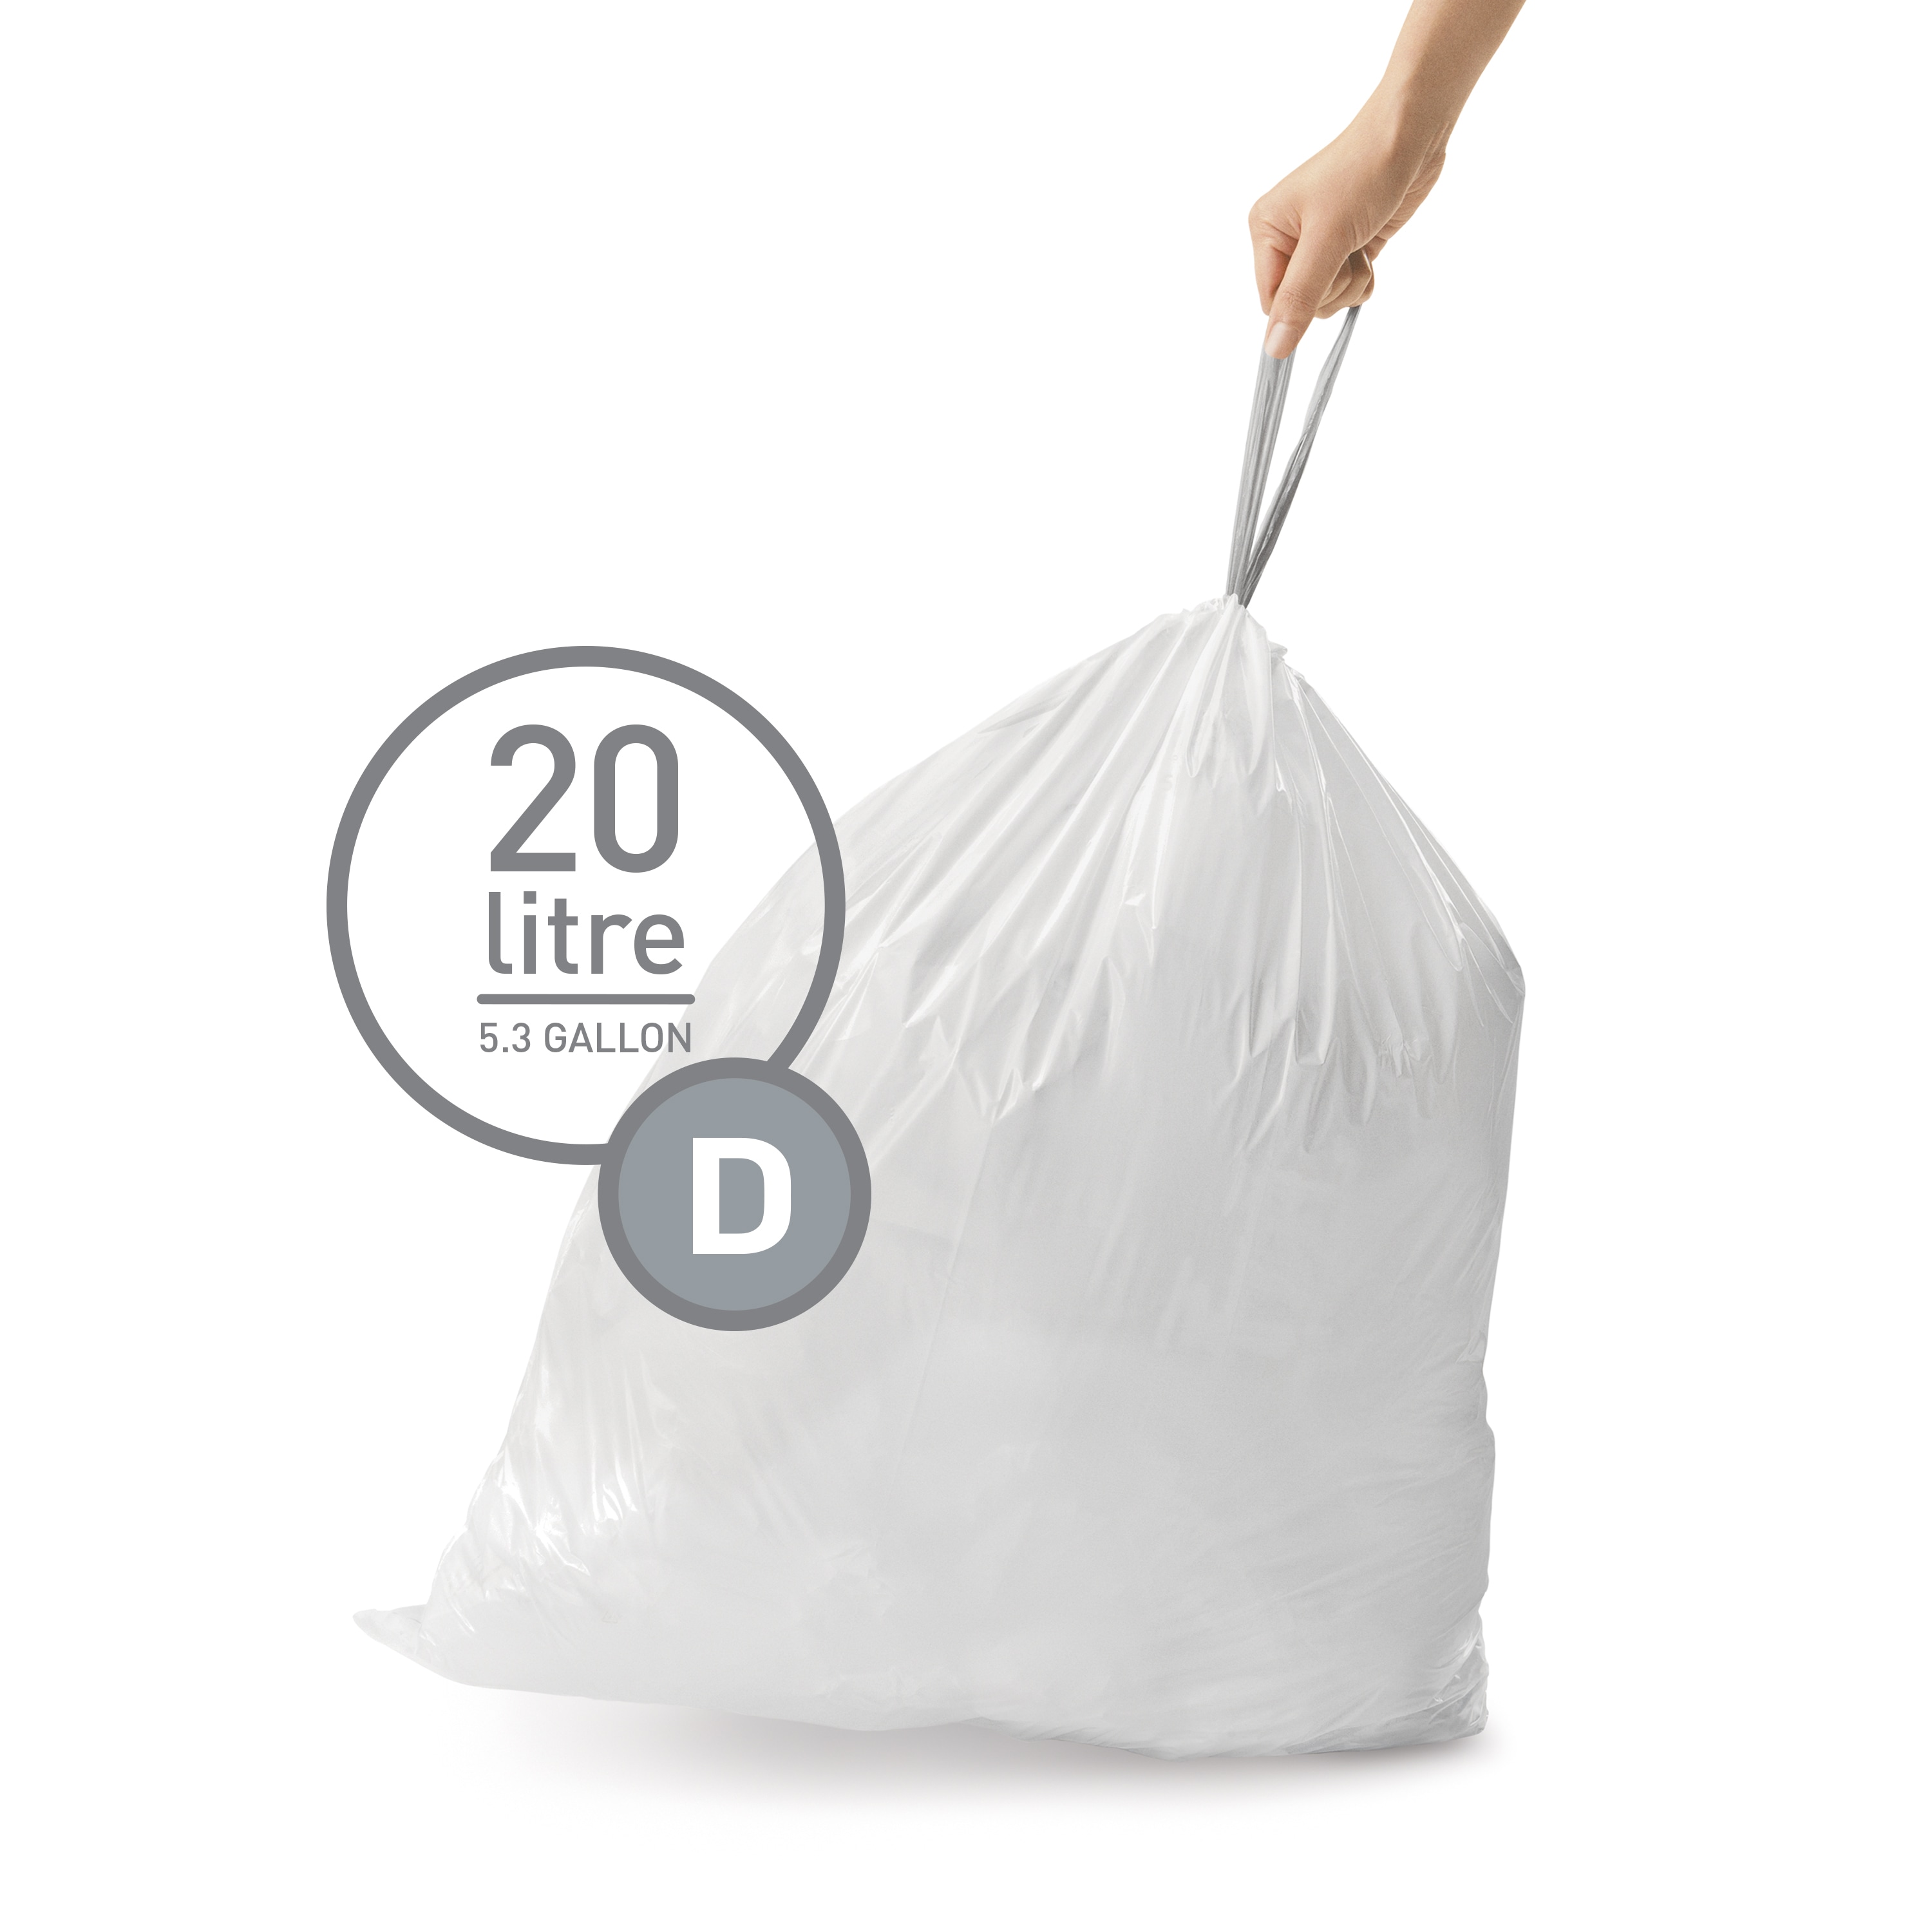  DAJITRE Small Trash Bag, 3-5 Gallon Garbage Bags Bathroom Trash  can Liners for Bedroom Home Kitchen 150 Counts(3 Gallon (90 Counts), Clear)  : Health & Household